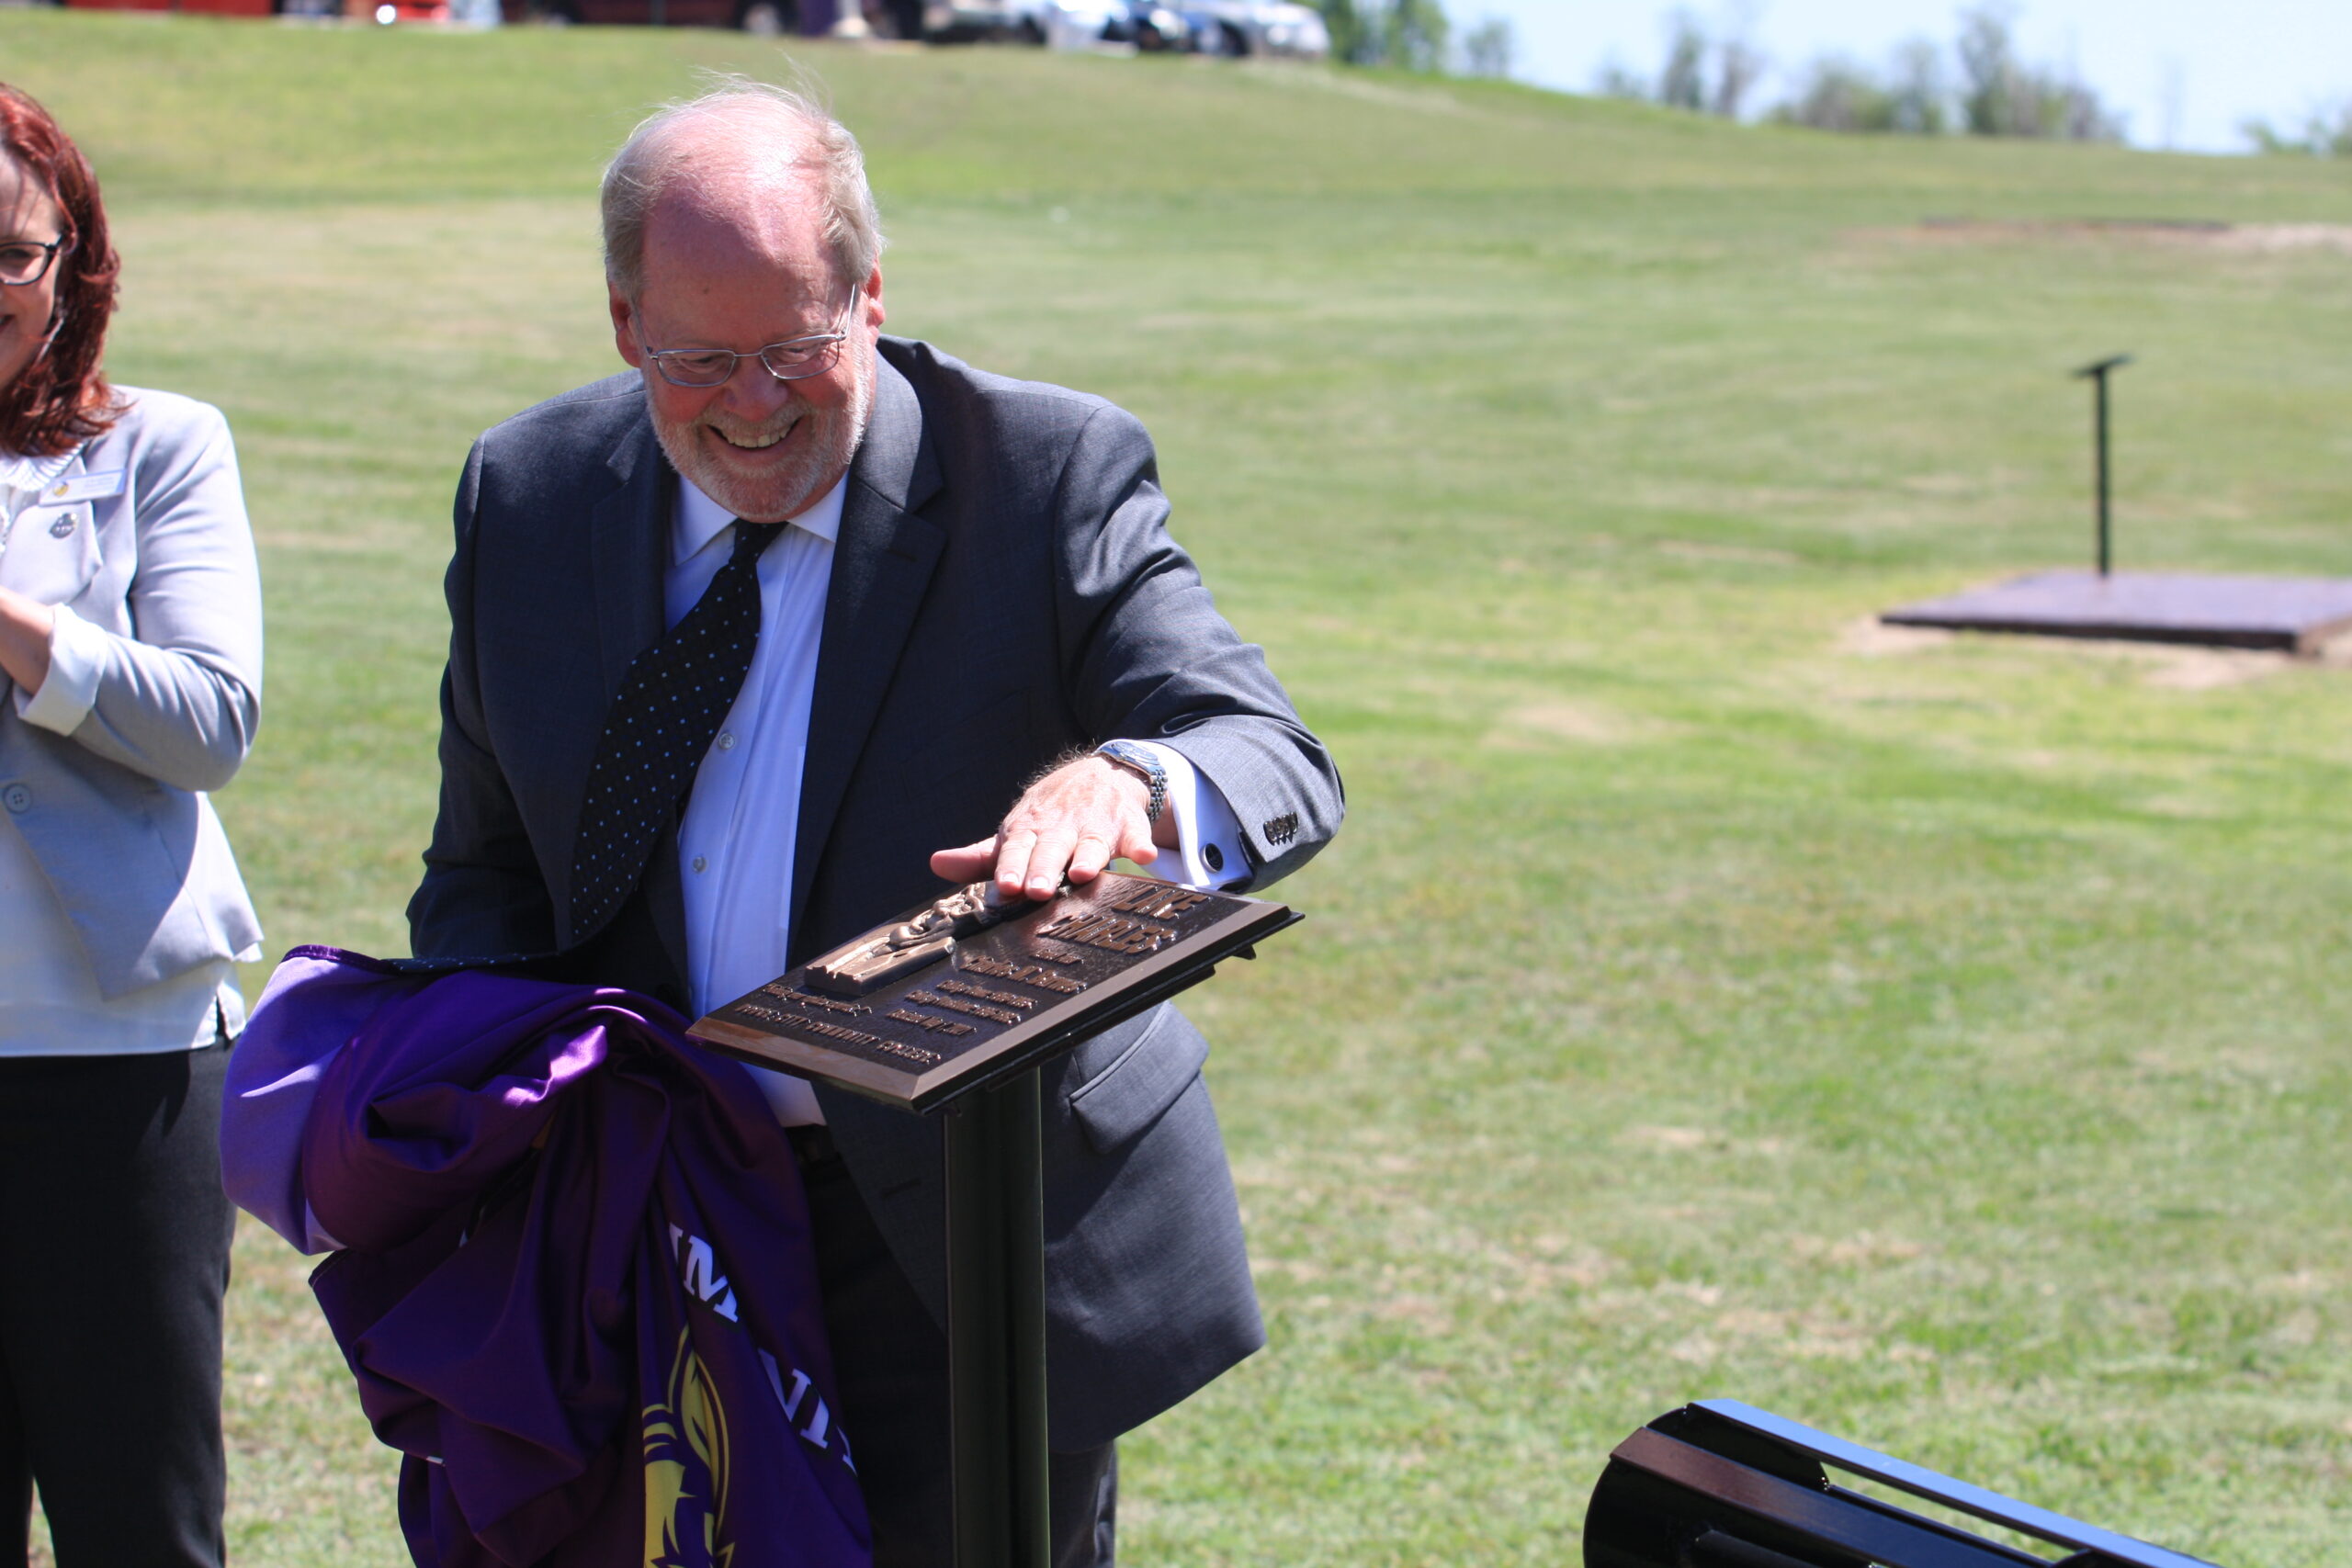 Dr. Roger Barnes unveils the bronze plaque honoring his father, Charles M. Barnes, at the dedication event for DC3’s Lake Charles on May 7. [Photo by Justin Wilson]